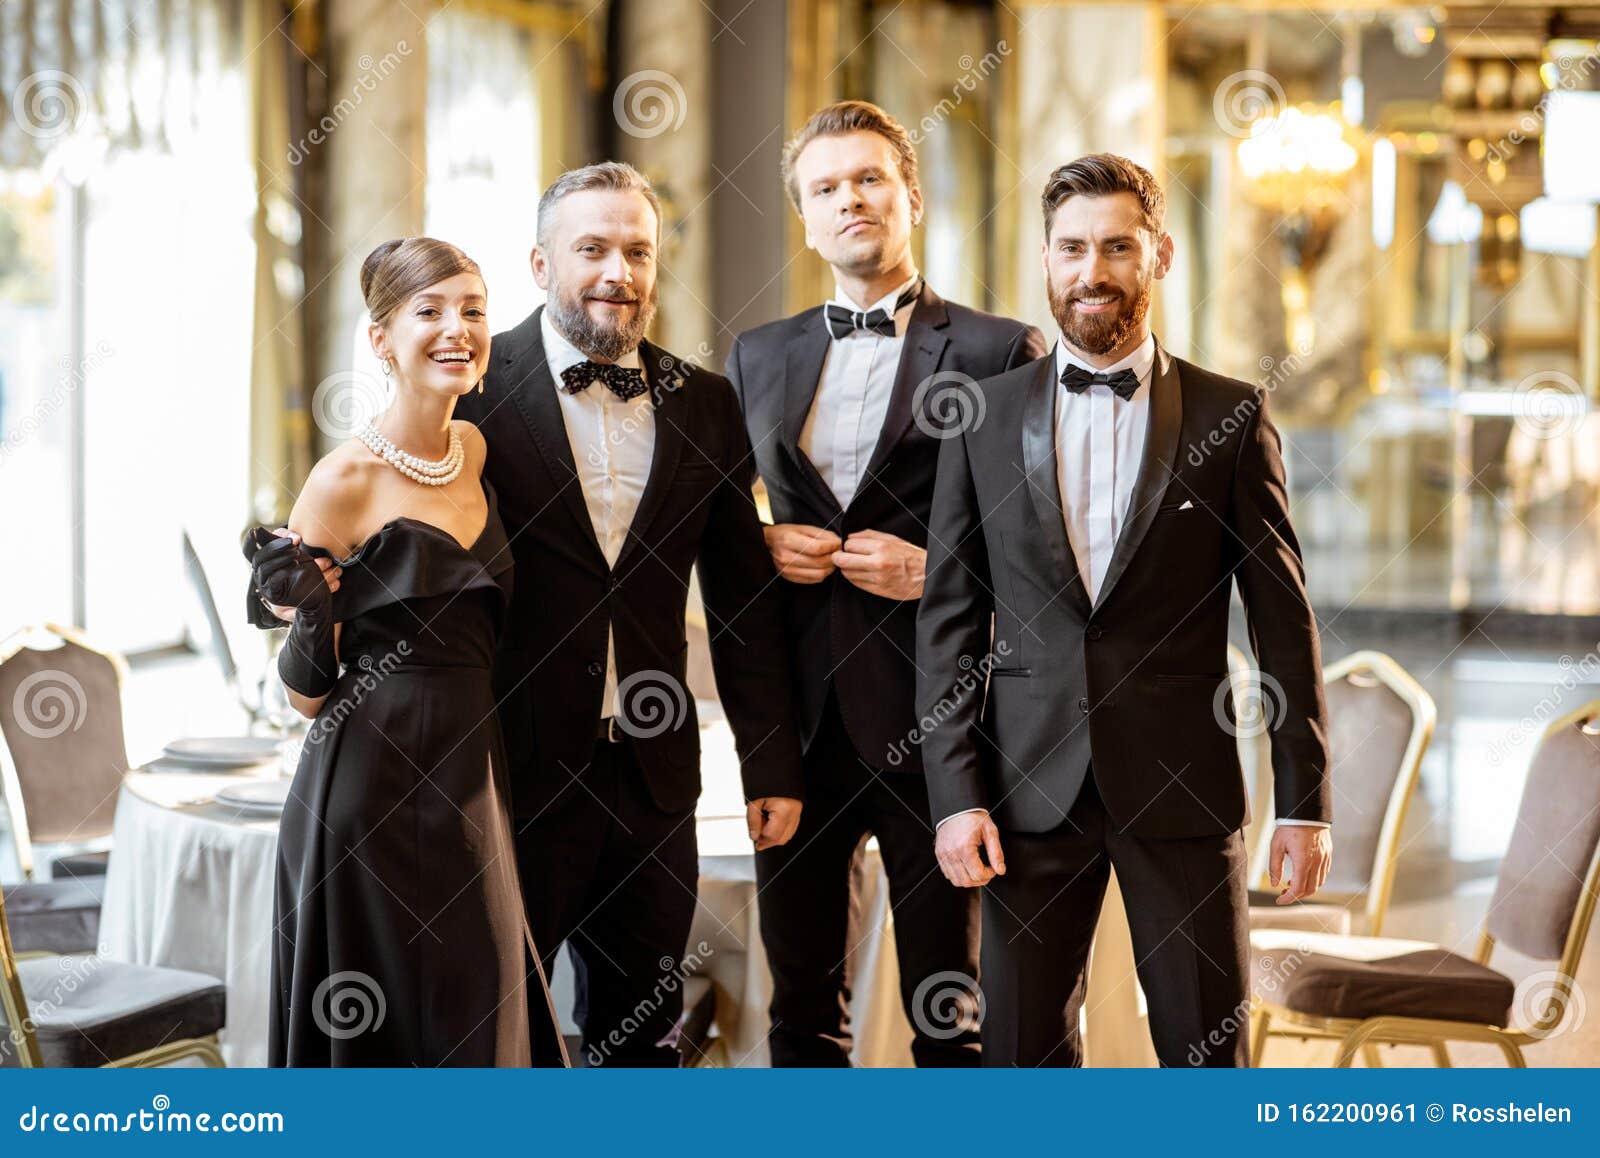 Elegant People at the Restaurant Hall Stock Image - Image of adult ...